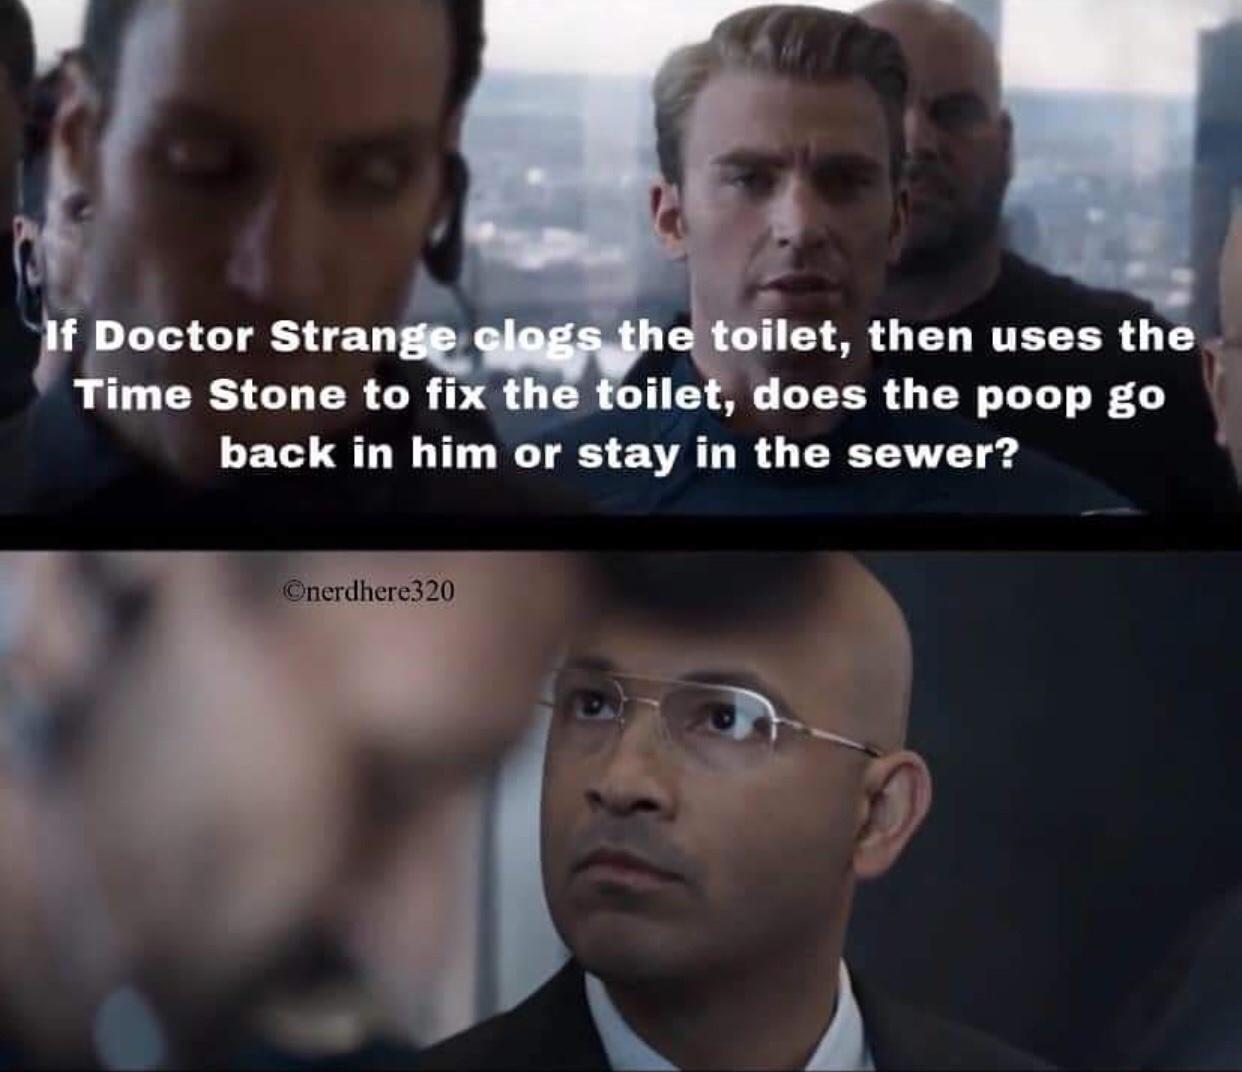 photo caption - If Doctor Strange clogs the toilet, then uses the Time Stone to fix the toilet, does the poop go back in him or stay in the sewer? nerdhere320